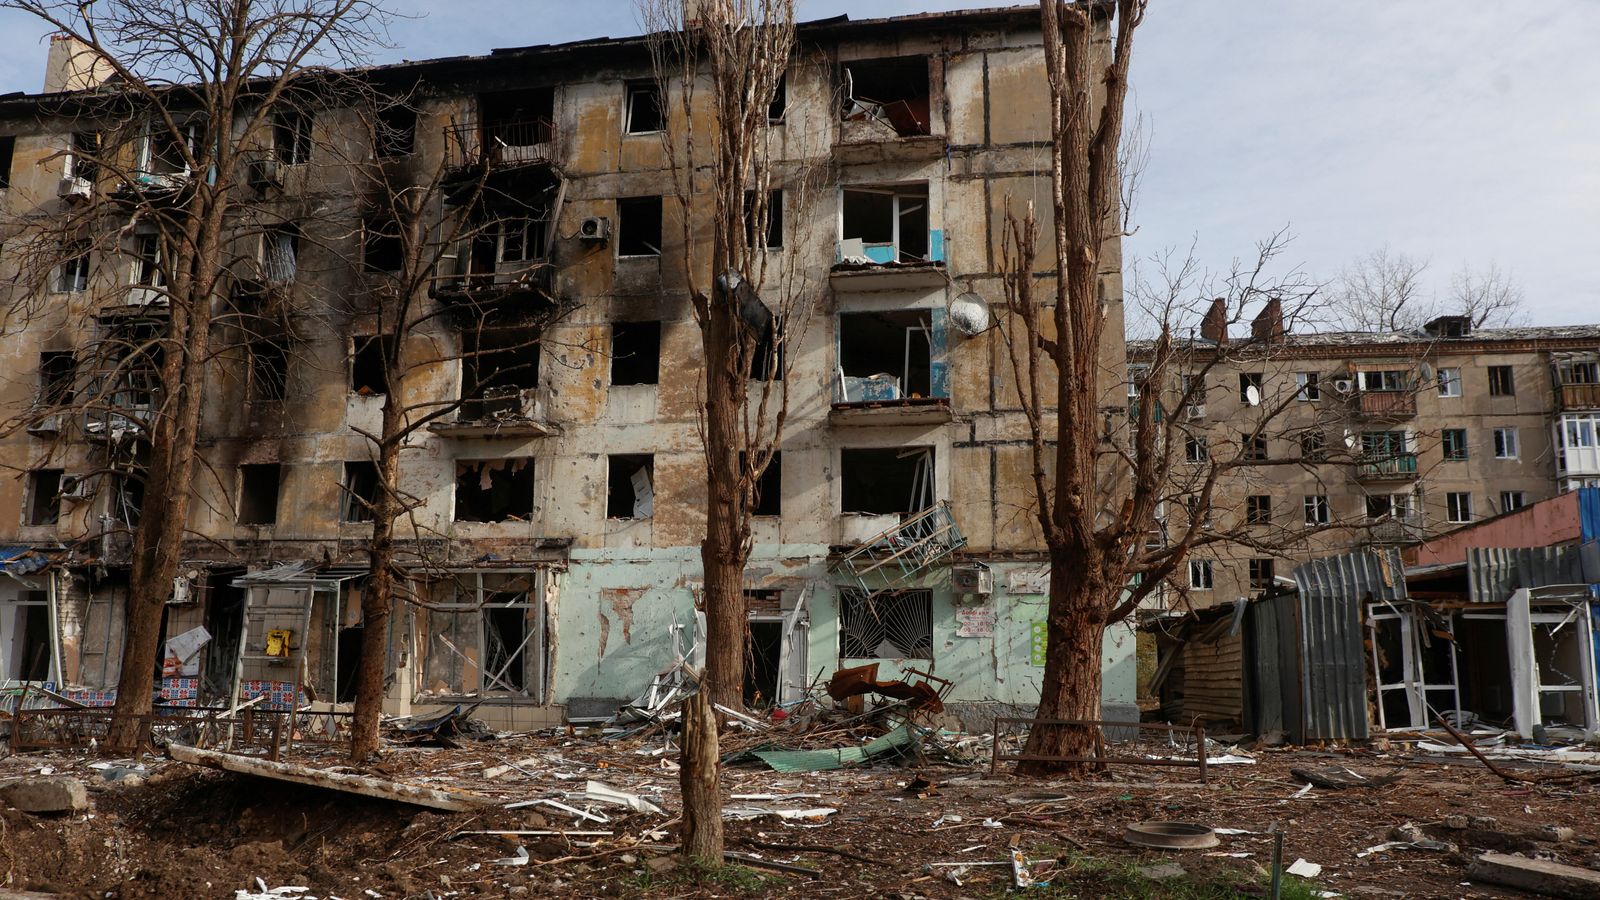 was a lack of ukrainian ammunition to blame for russia taking avdiivka?